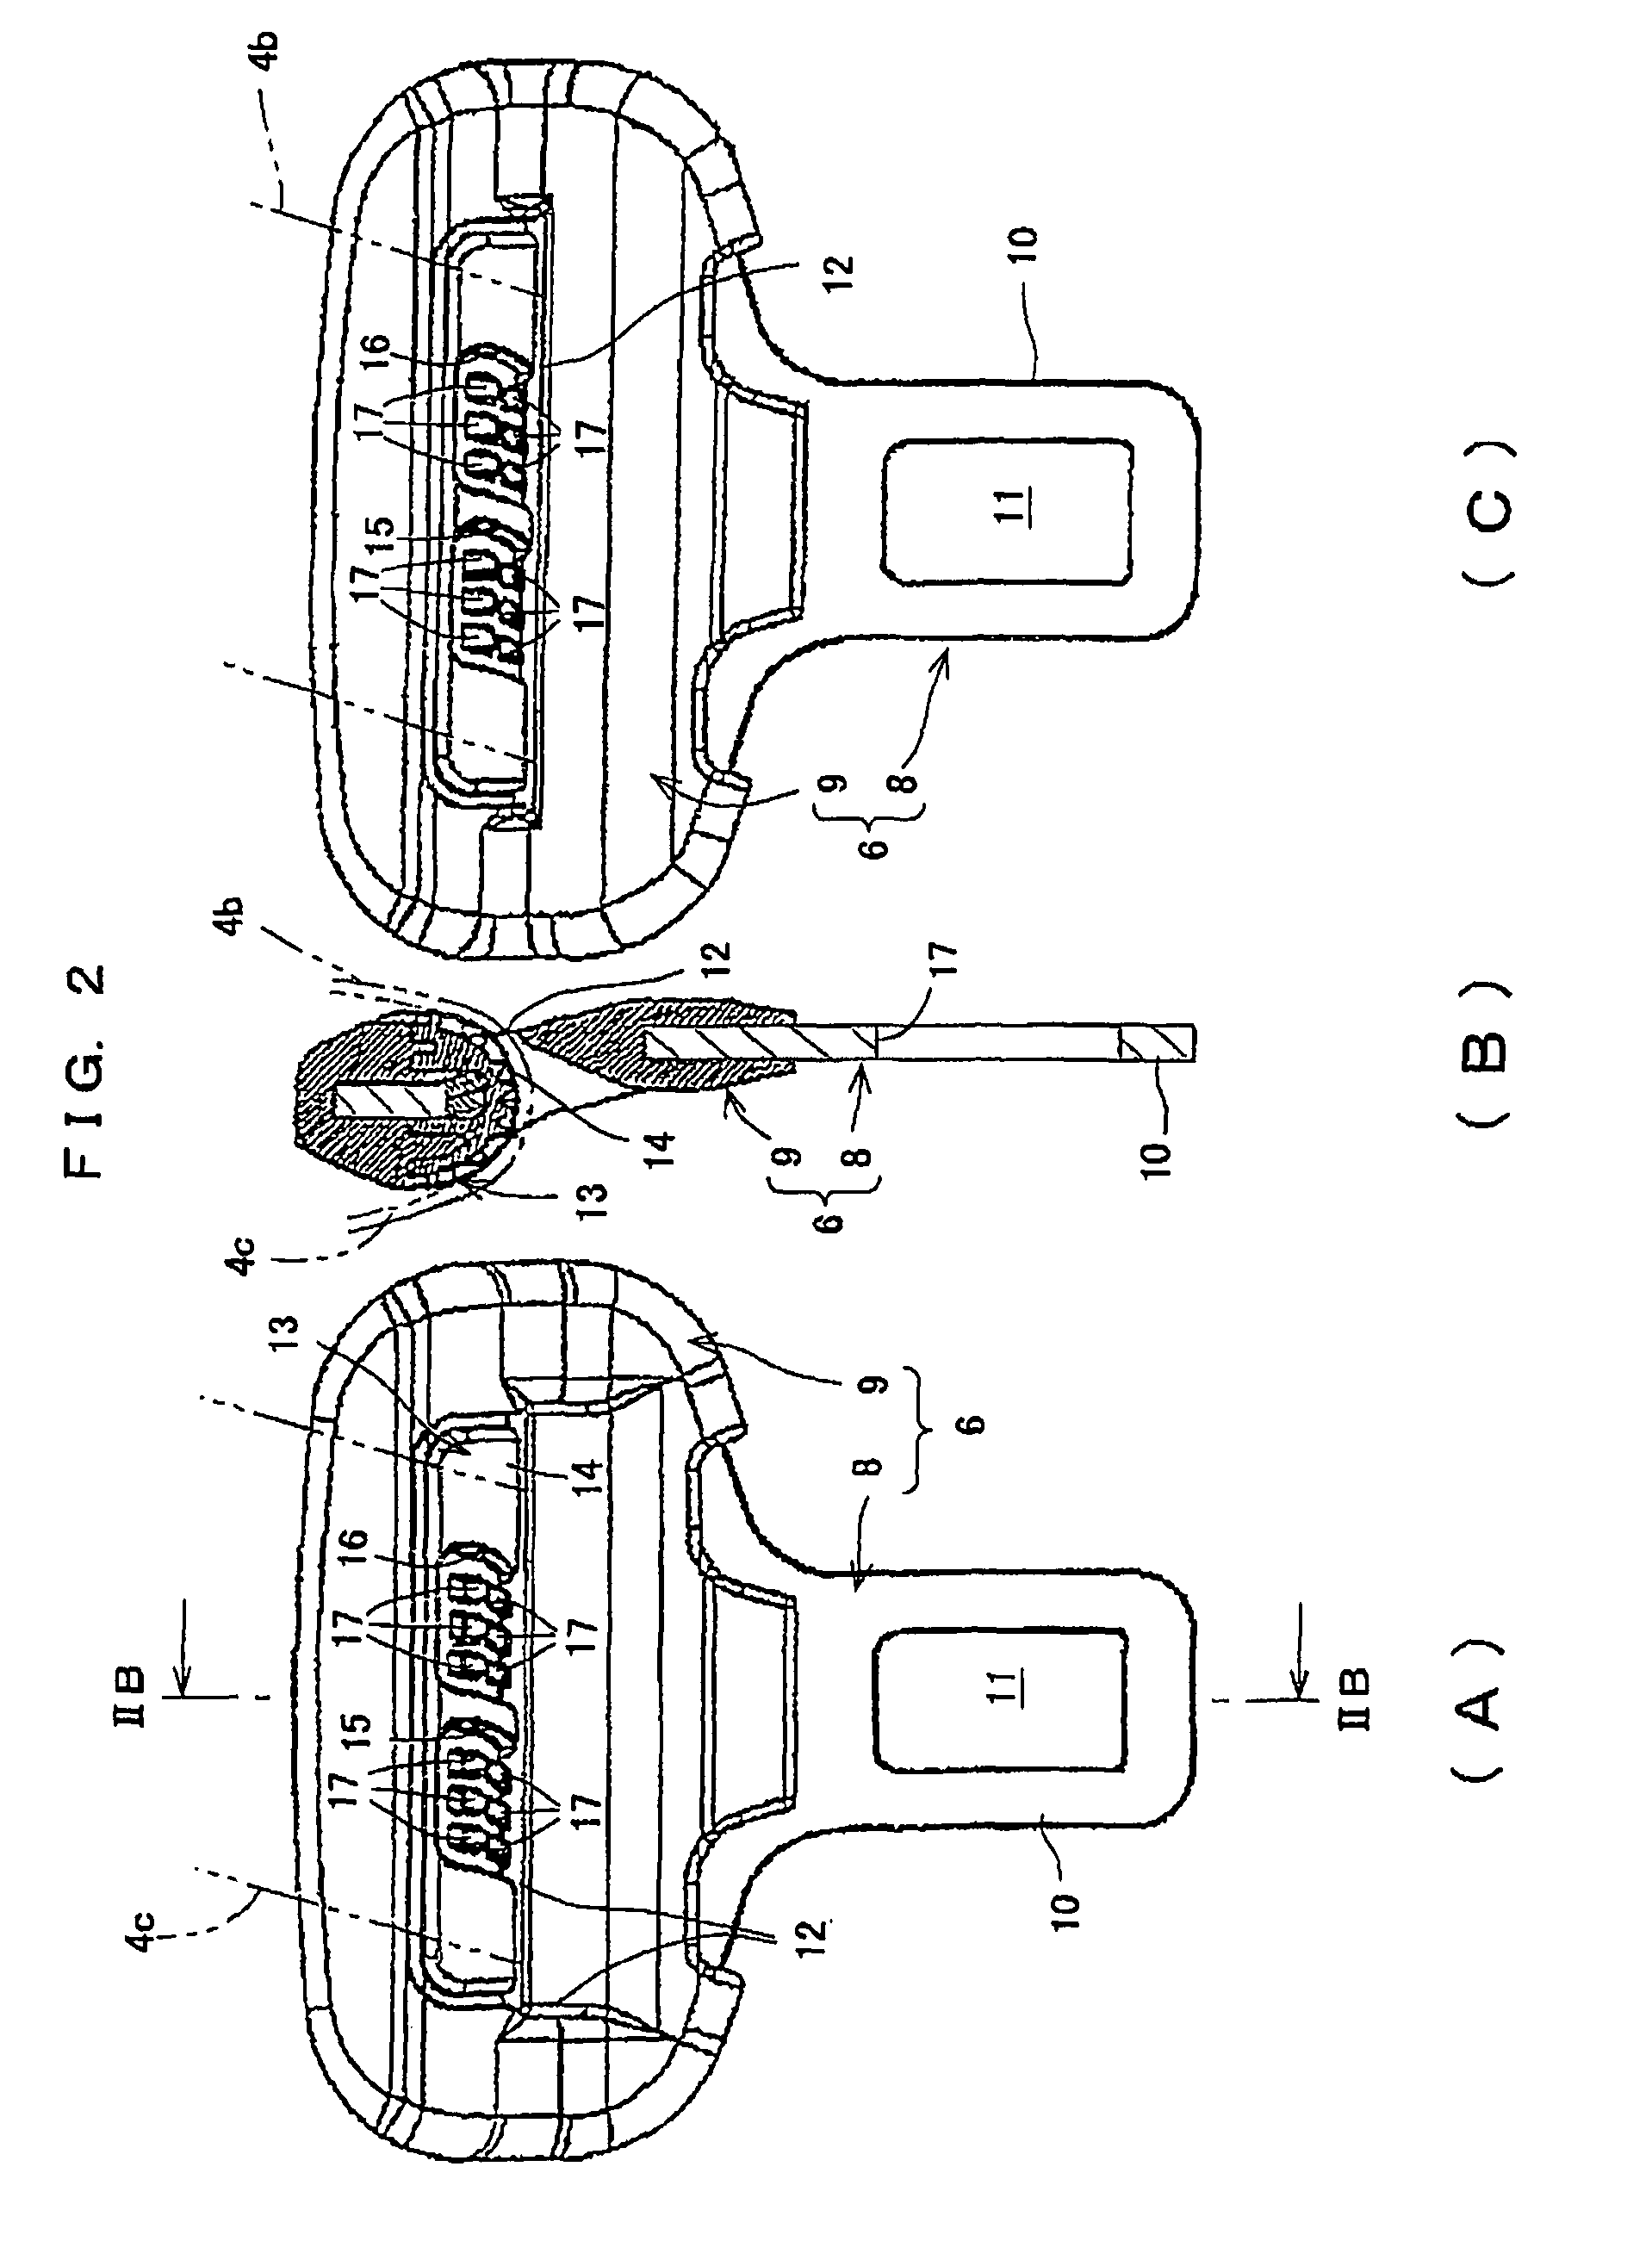 Tongue and seat belt device using the same